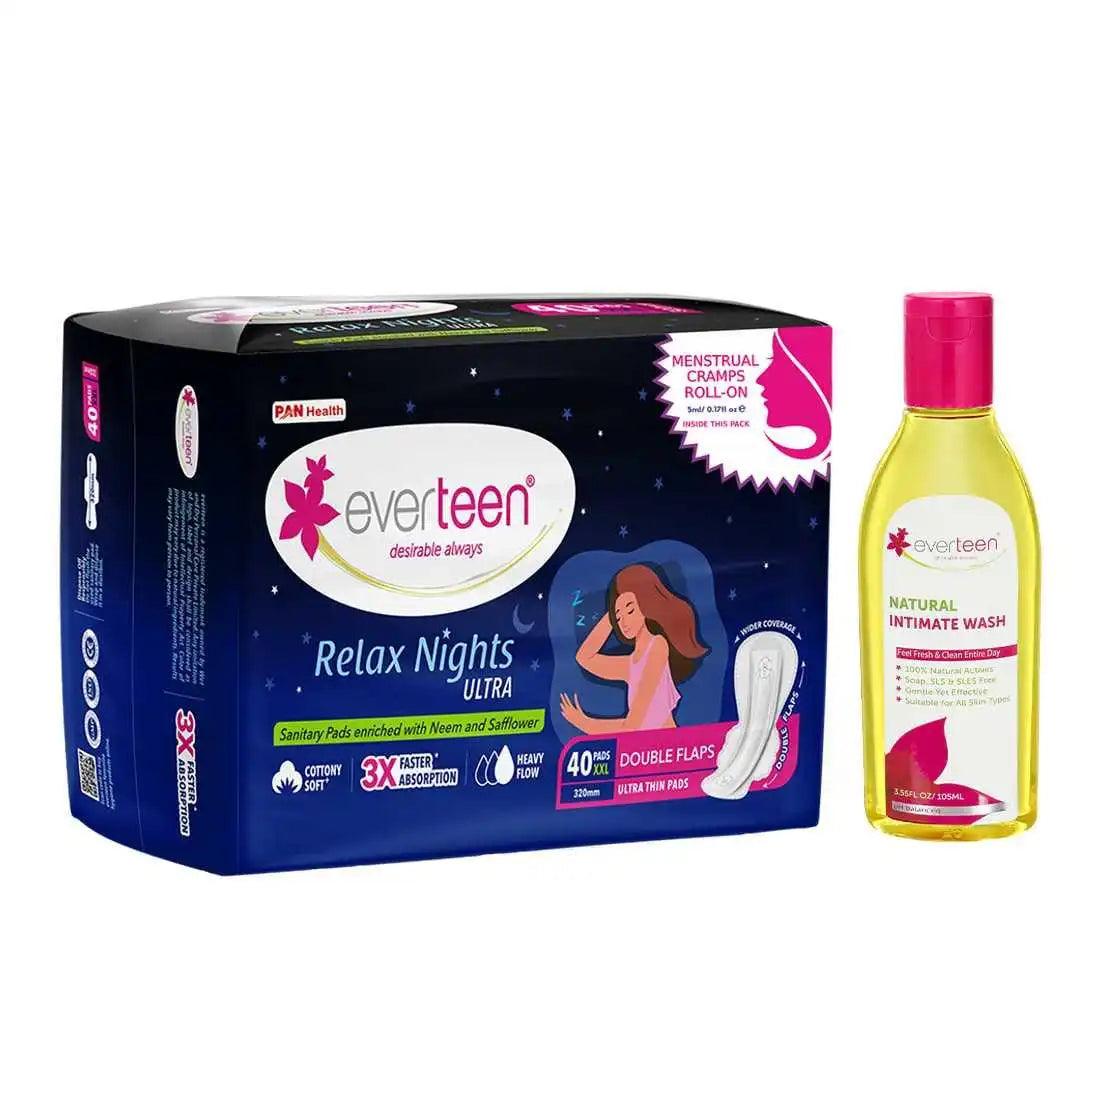 Buy everteen Relax Nights Ultra 40 Pads and Natural Intimate Wash 105ml 7419870518264 - everteen-neud.com